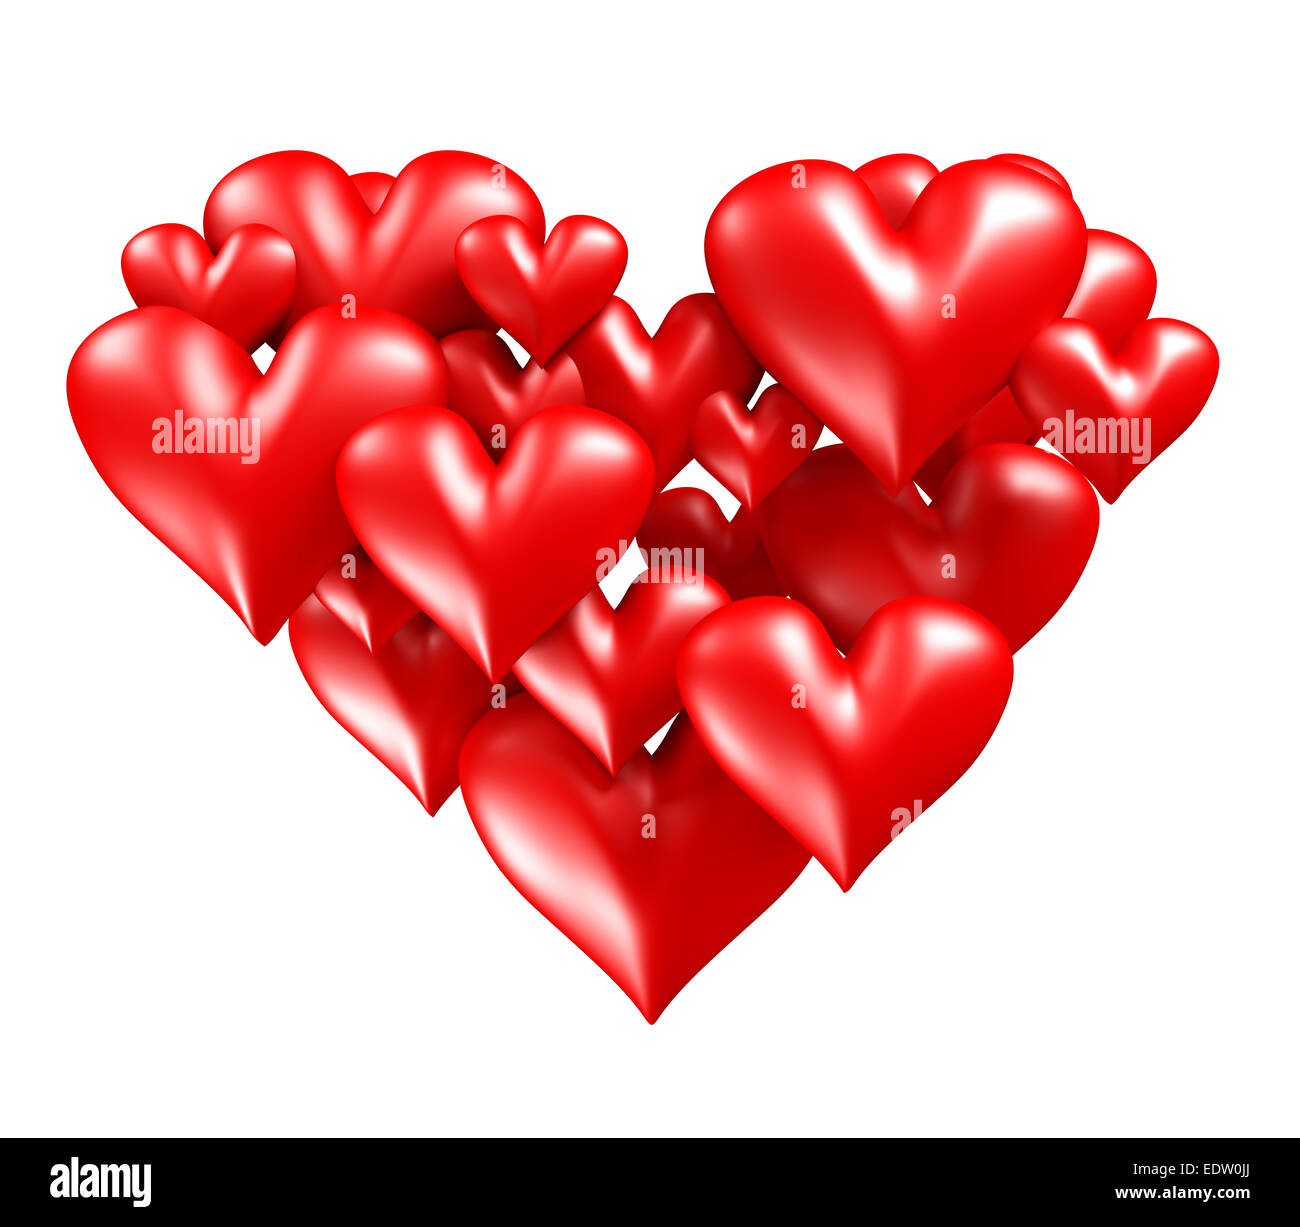 Red hearts in heart shape Stock Photo